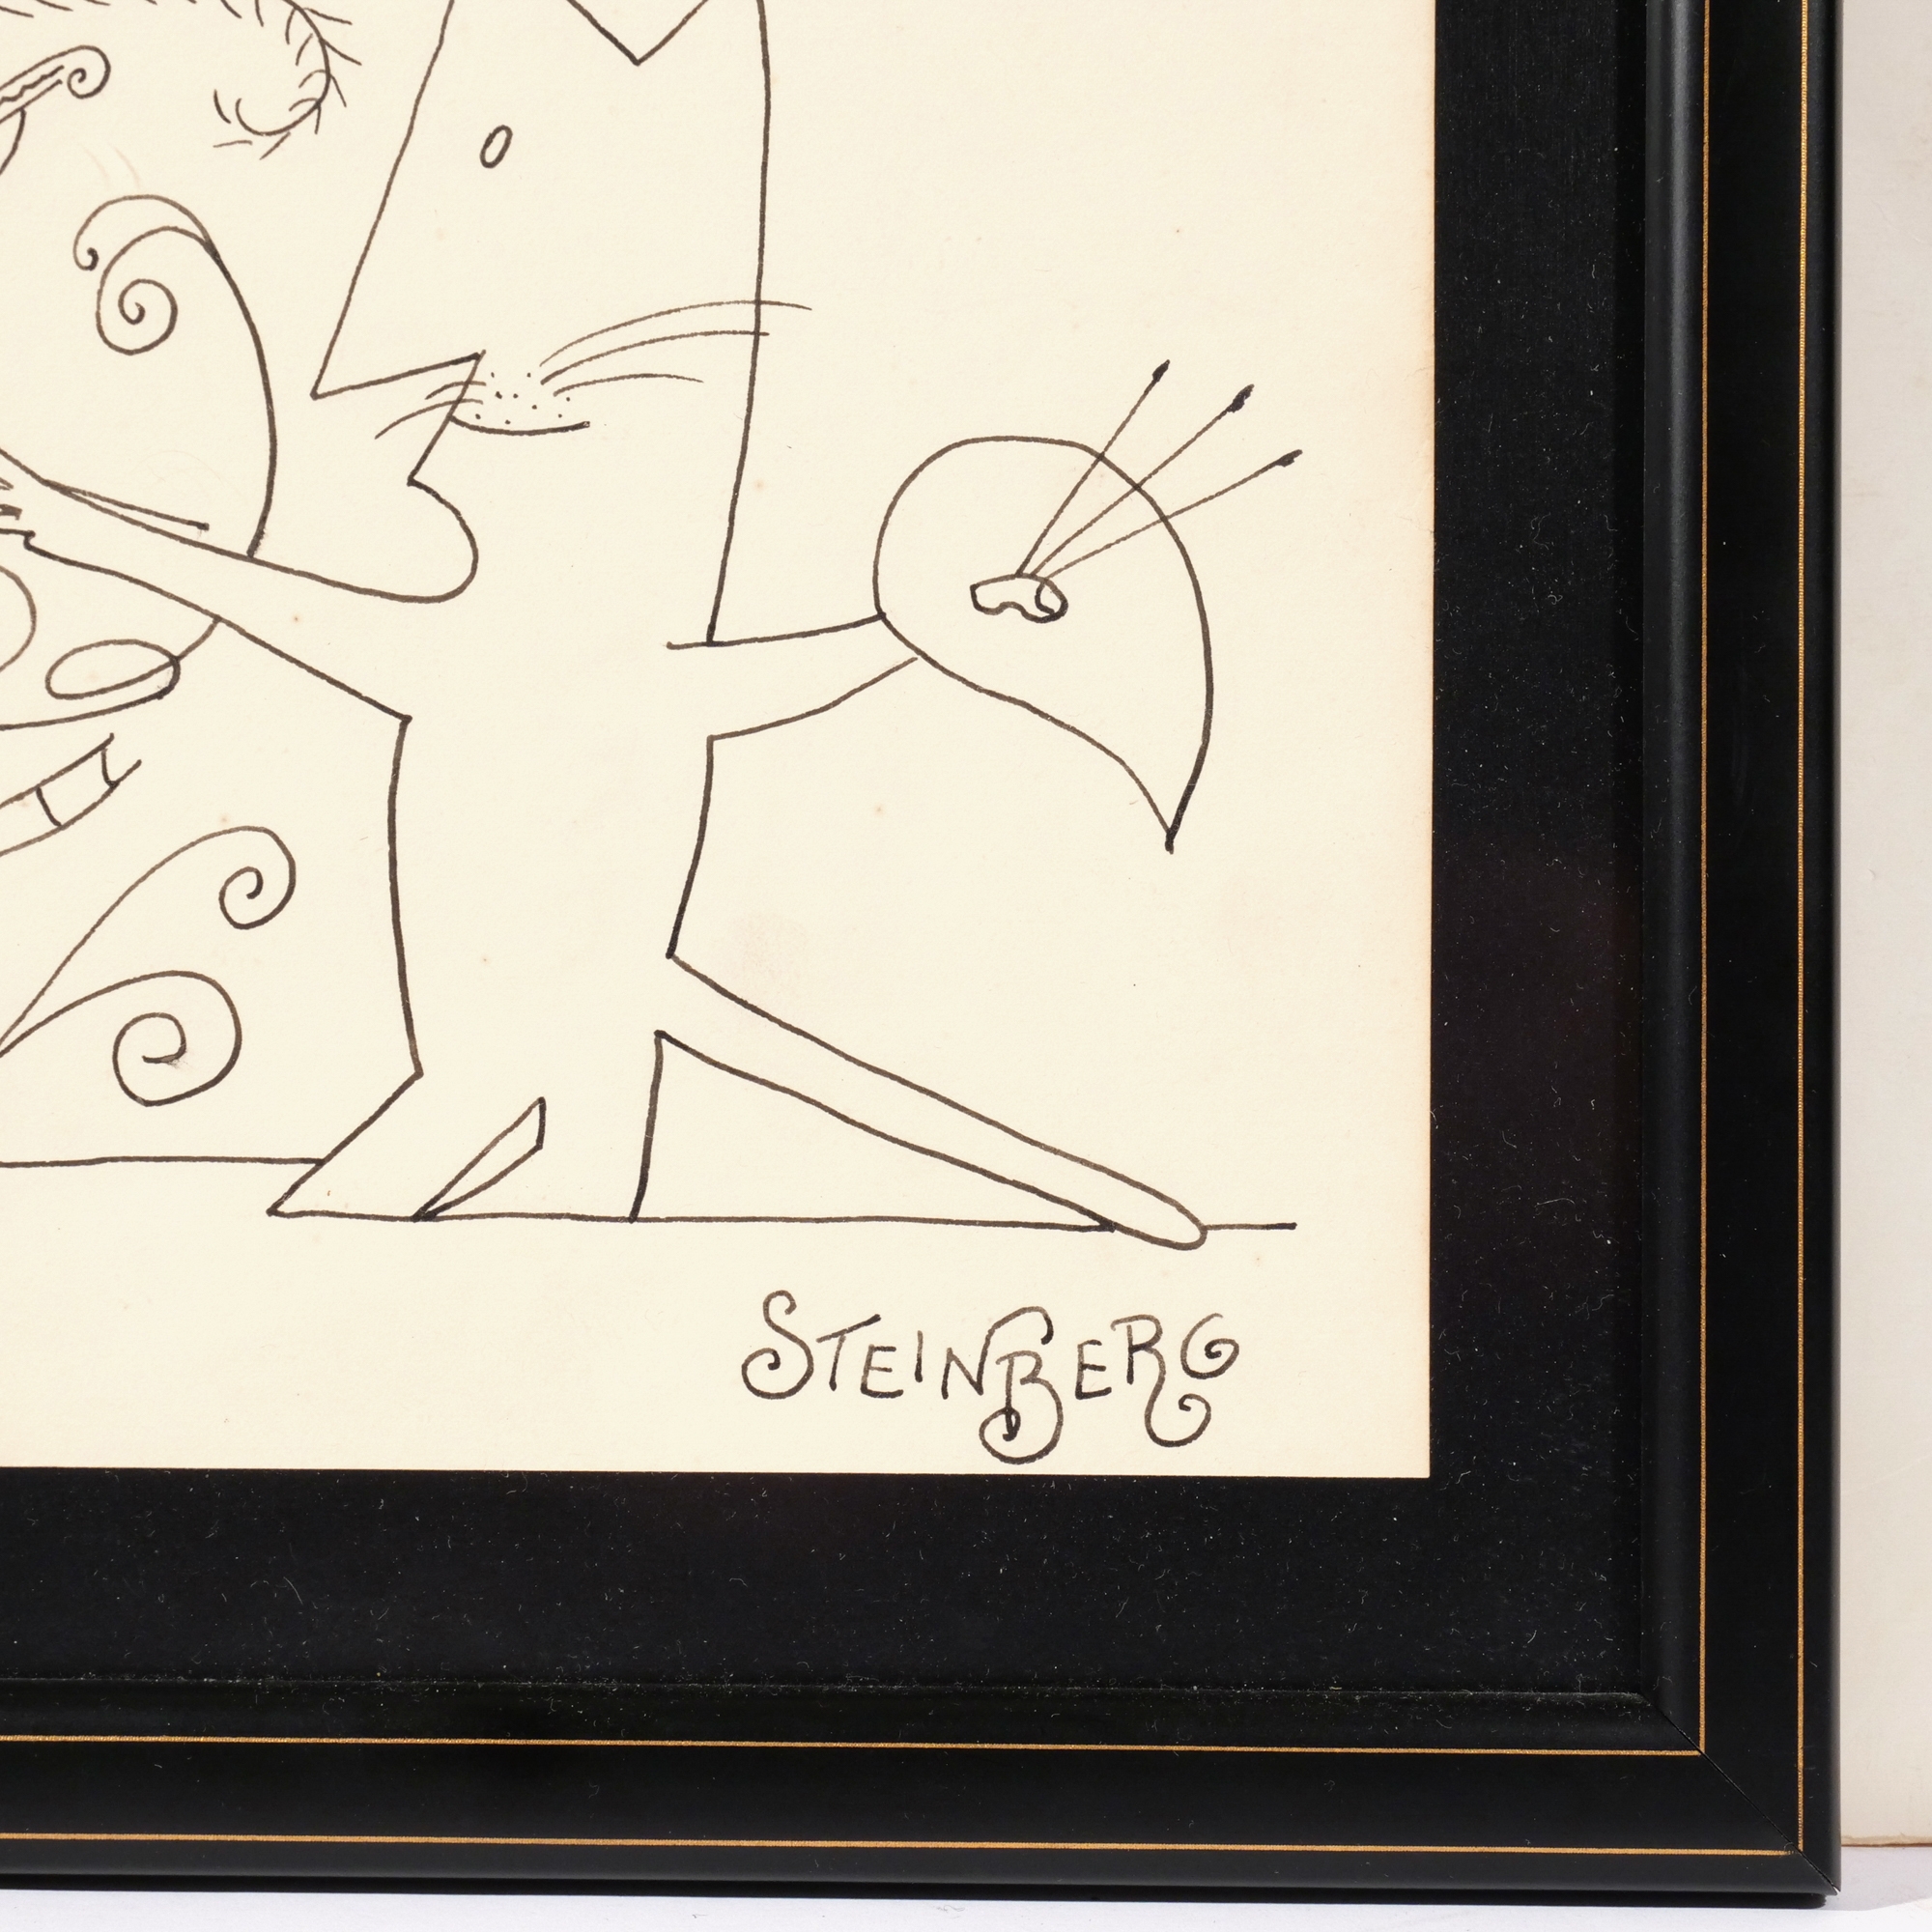 Artwork by Saul Steinberg, Cat painting a man, Made of Pen and ink on paper